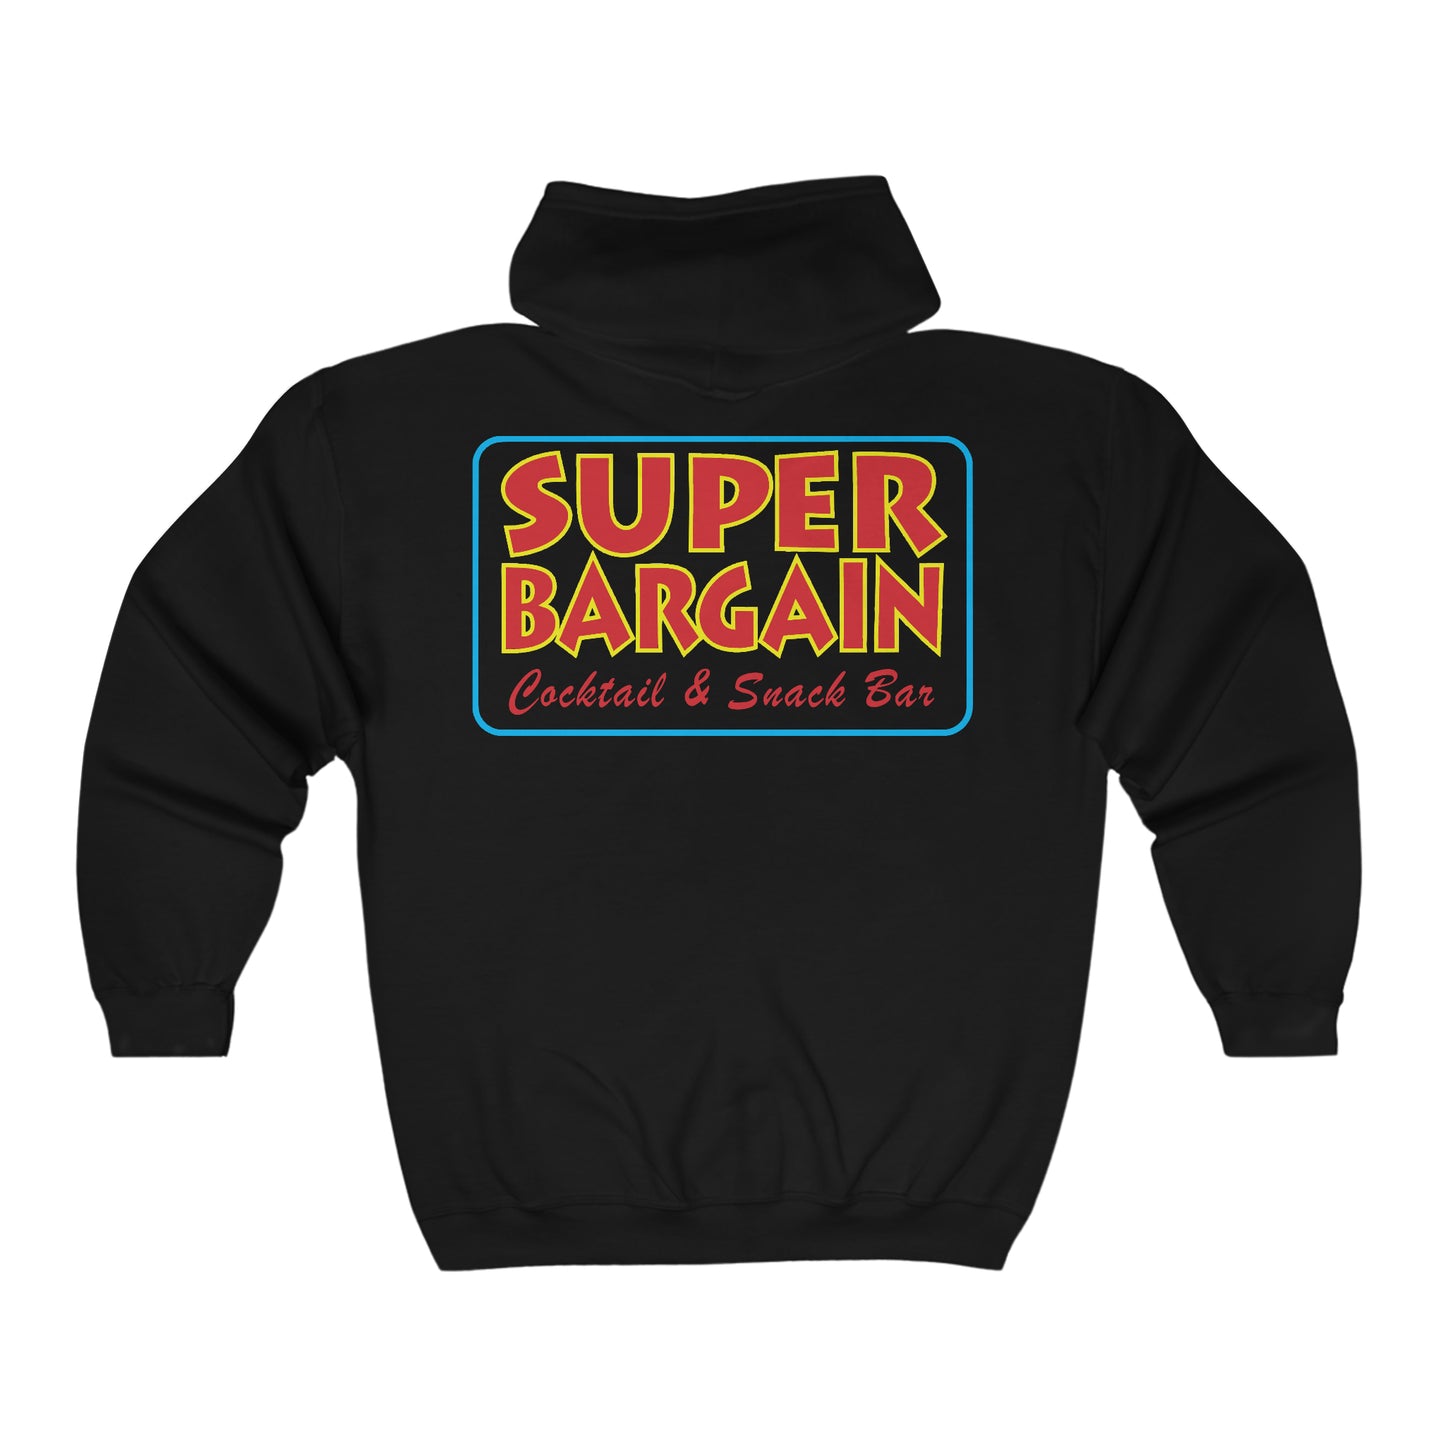 Black Unisex Heavy Blend™ Full Zip Hooded Sweatshirt by Printify with "Cabbagetown Super Bargain Cocktail & Snack Bar" text in a colorful retro font on the back.